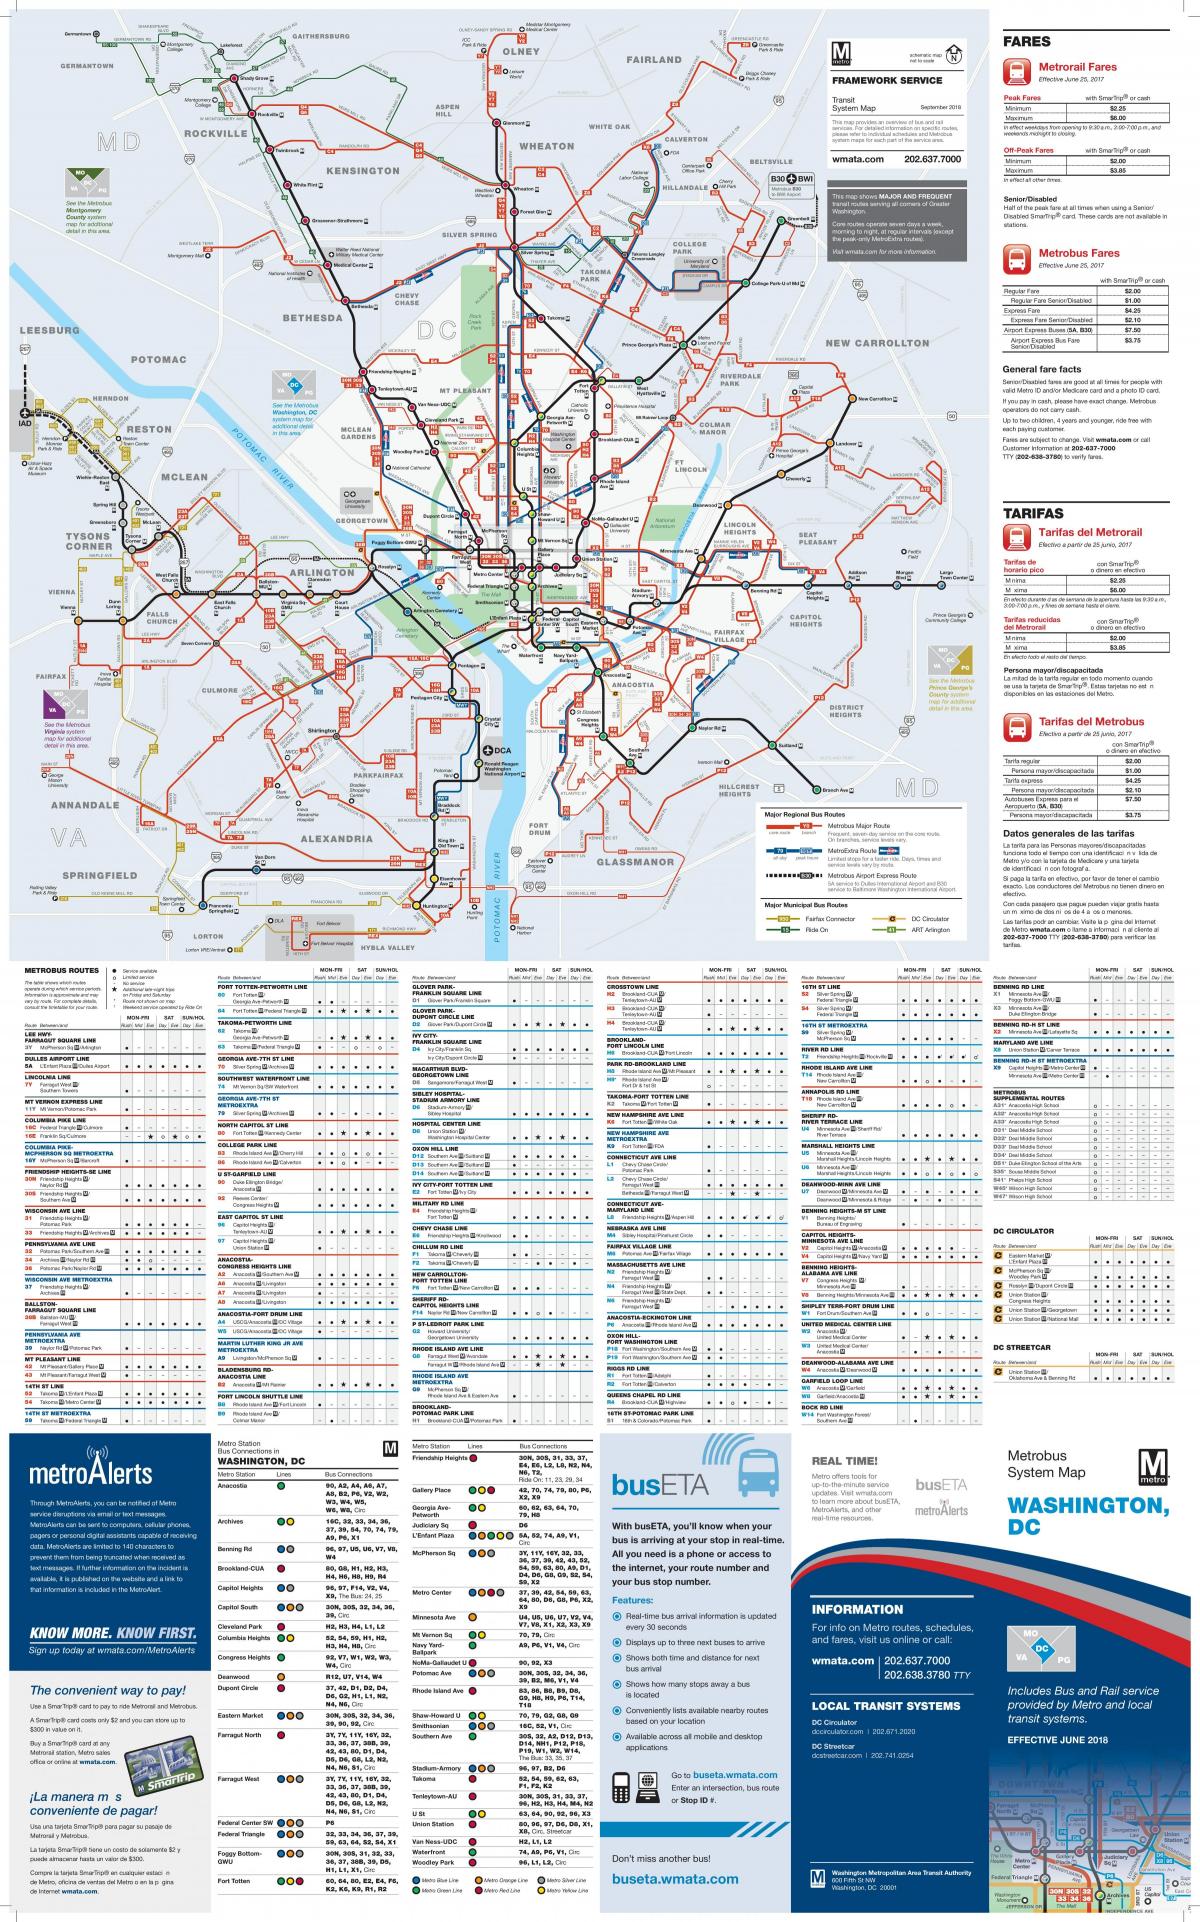 Map of Washington DC bus: bus routes and bus stations of Washington DC